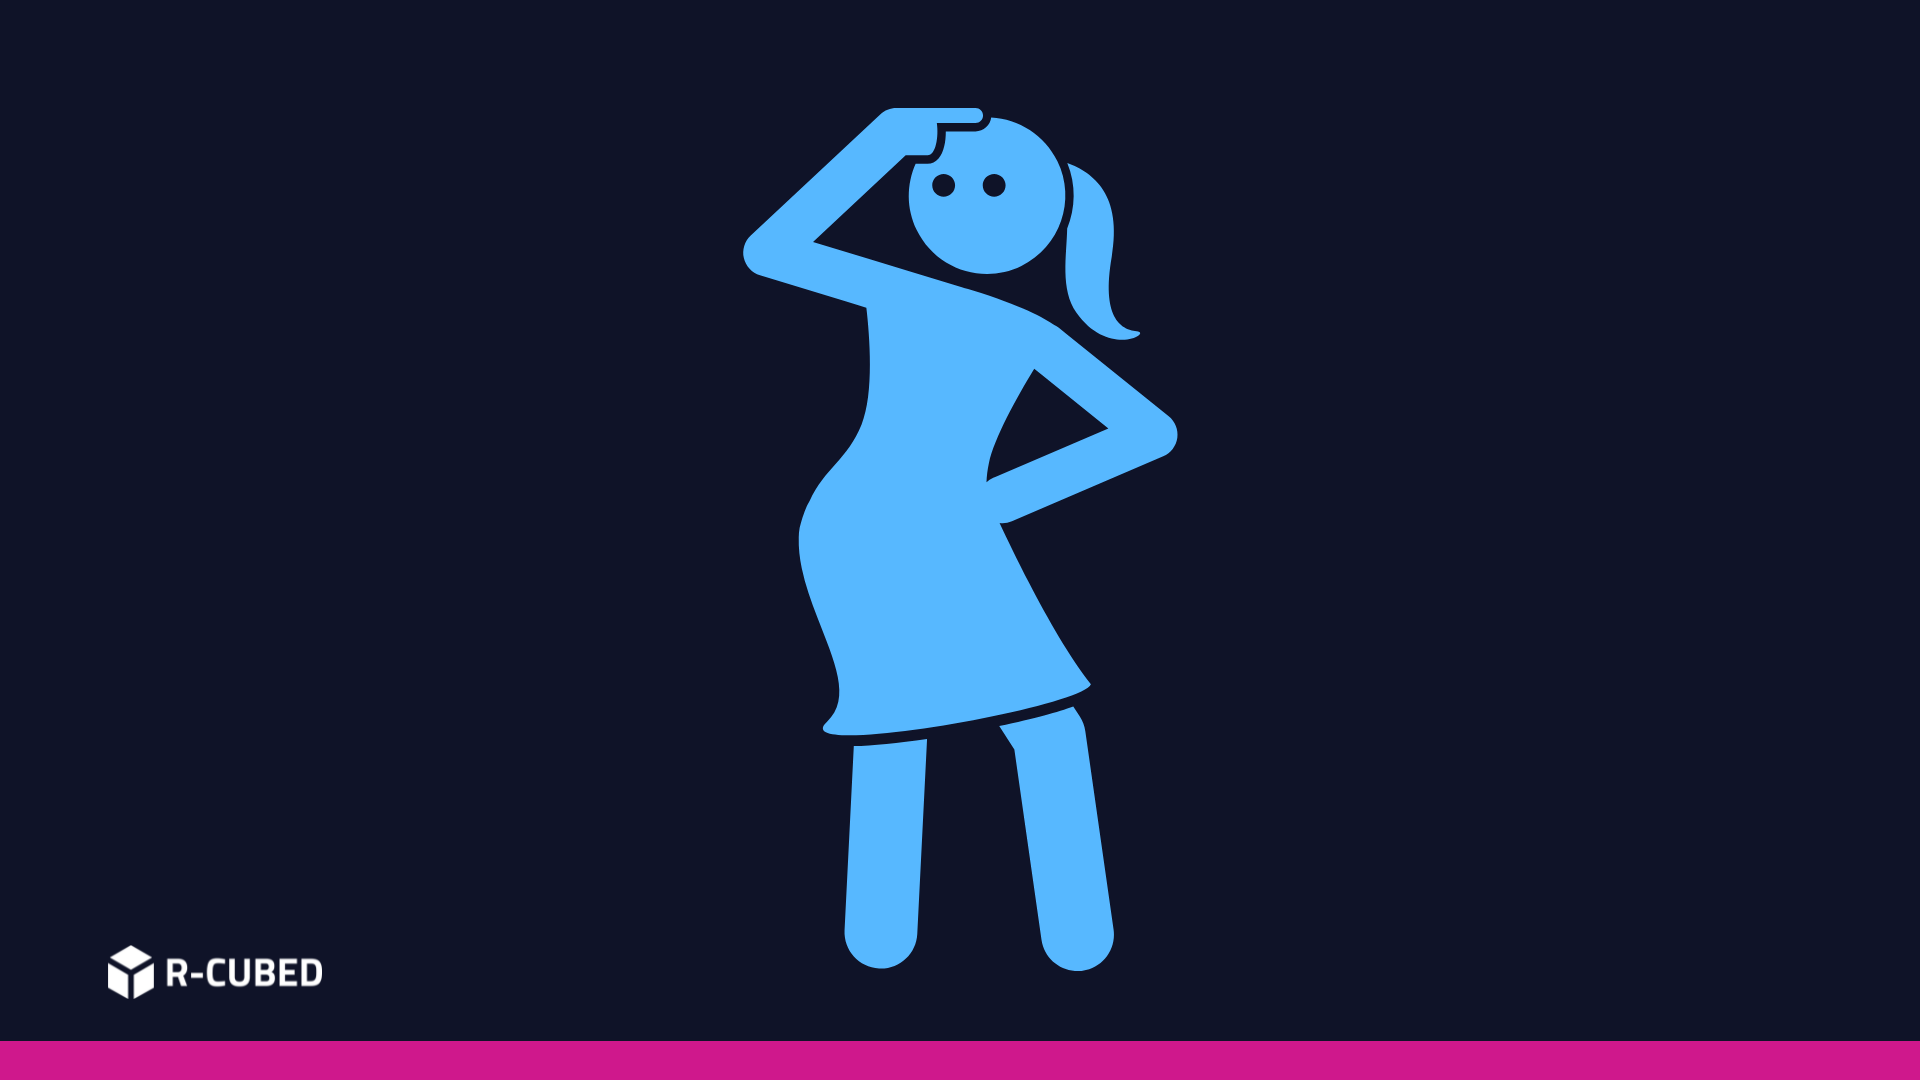 Light blue icon of woman looking on black background, white R-cubed logo in bottom left